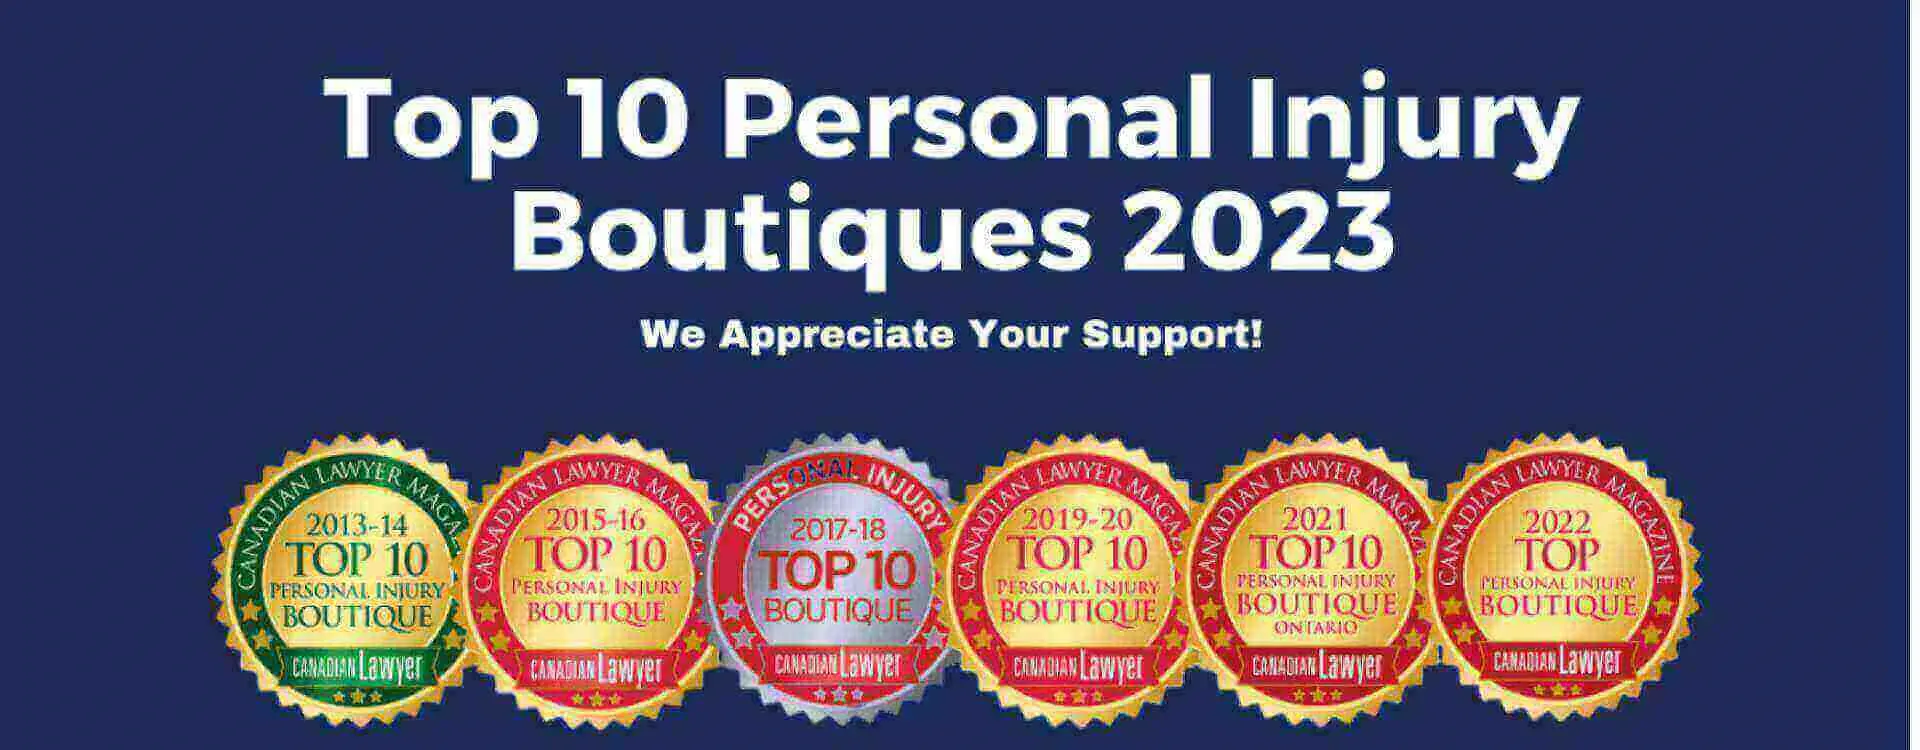 Top 10 Personal Injury Boutique 2023. We appreciate your support. Vote Gluckstein Lawyers